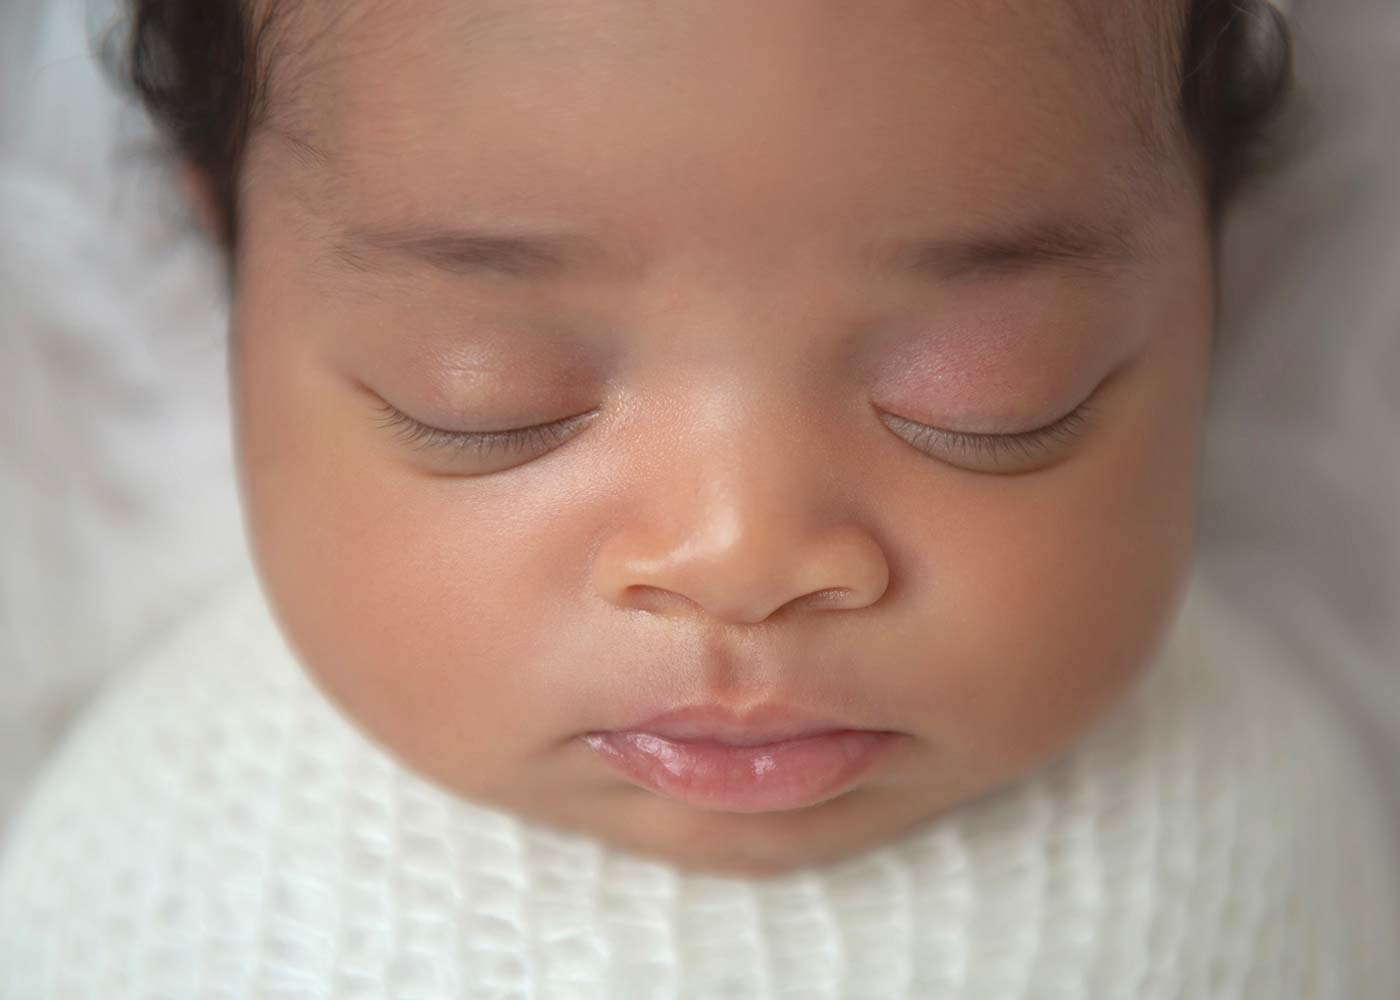 Closeup of a newborn baby's lips, eyes, and nose